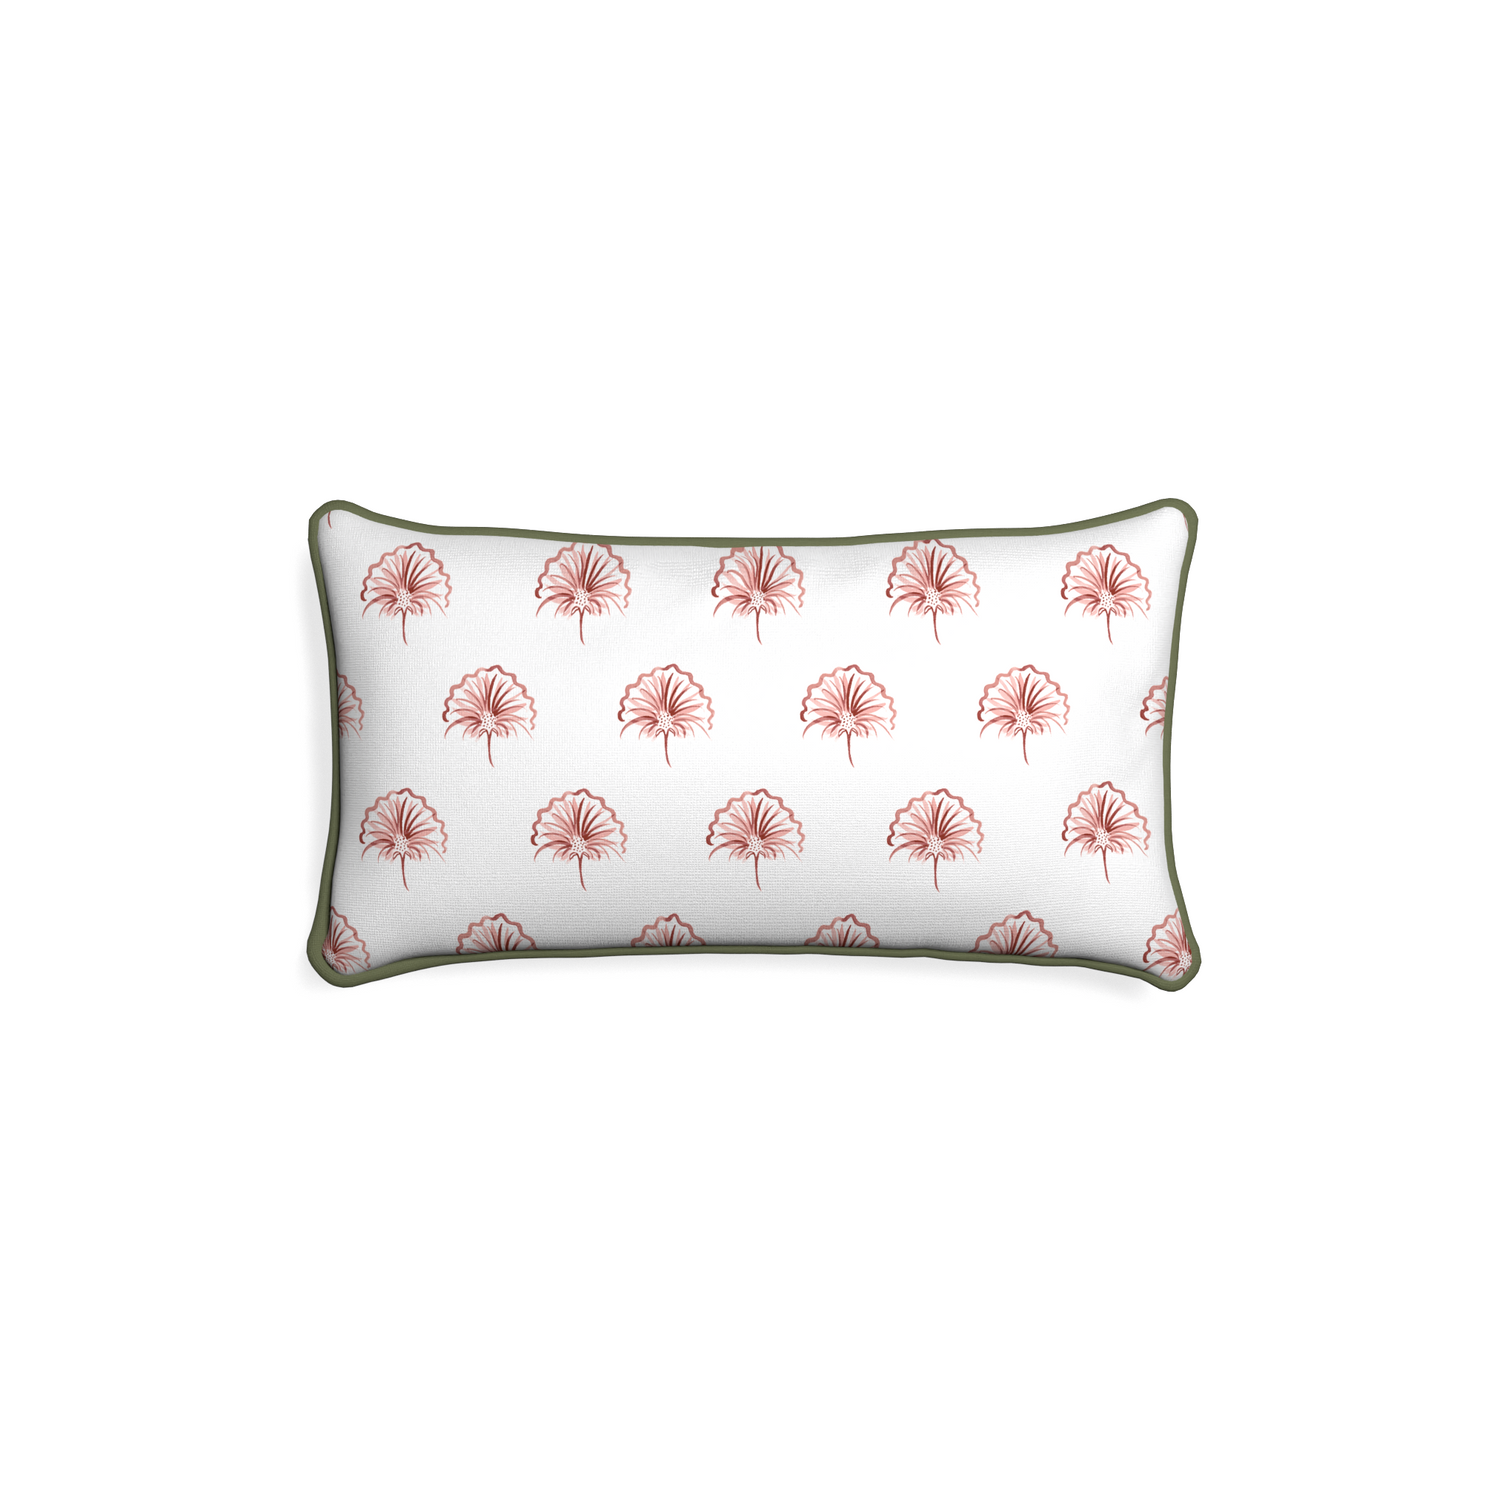 Petite-lumbar penelope rose custom floral pinkpillow with f piping on white background